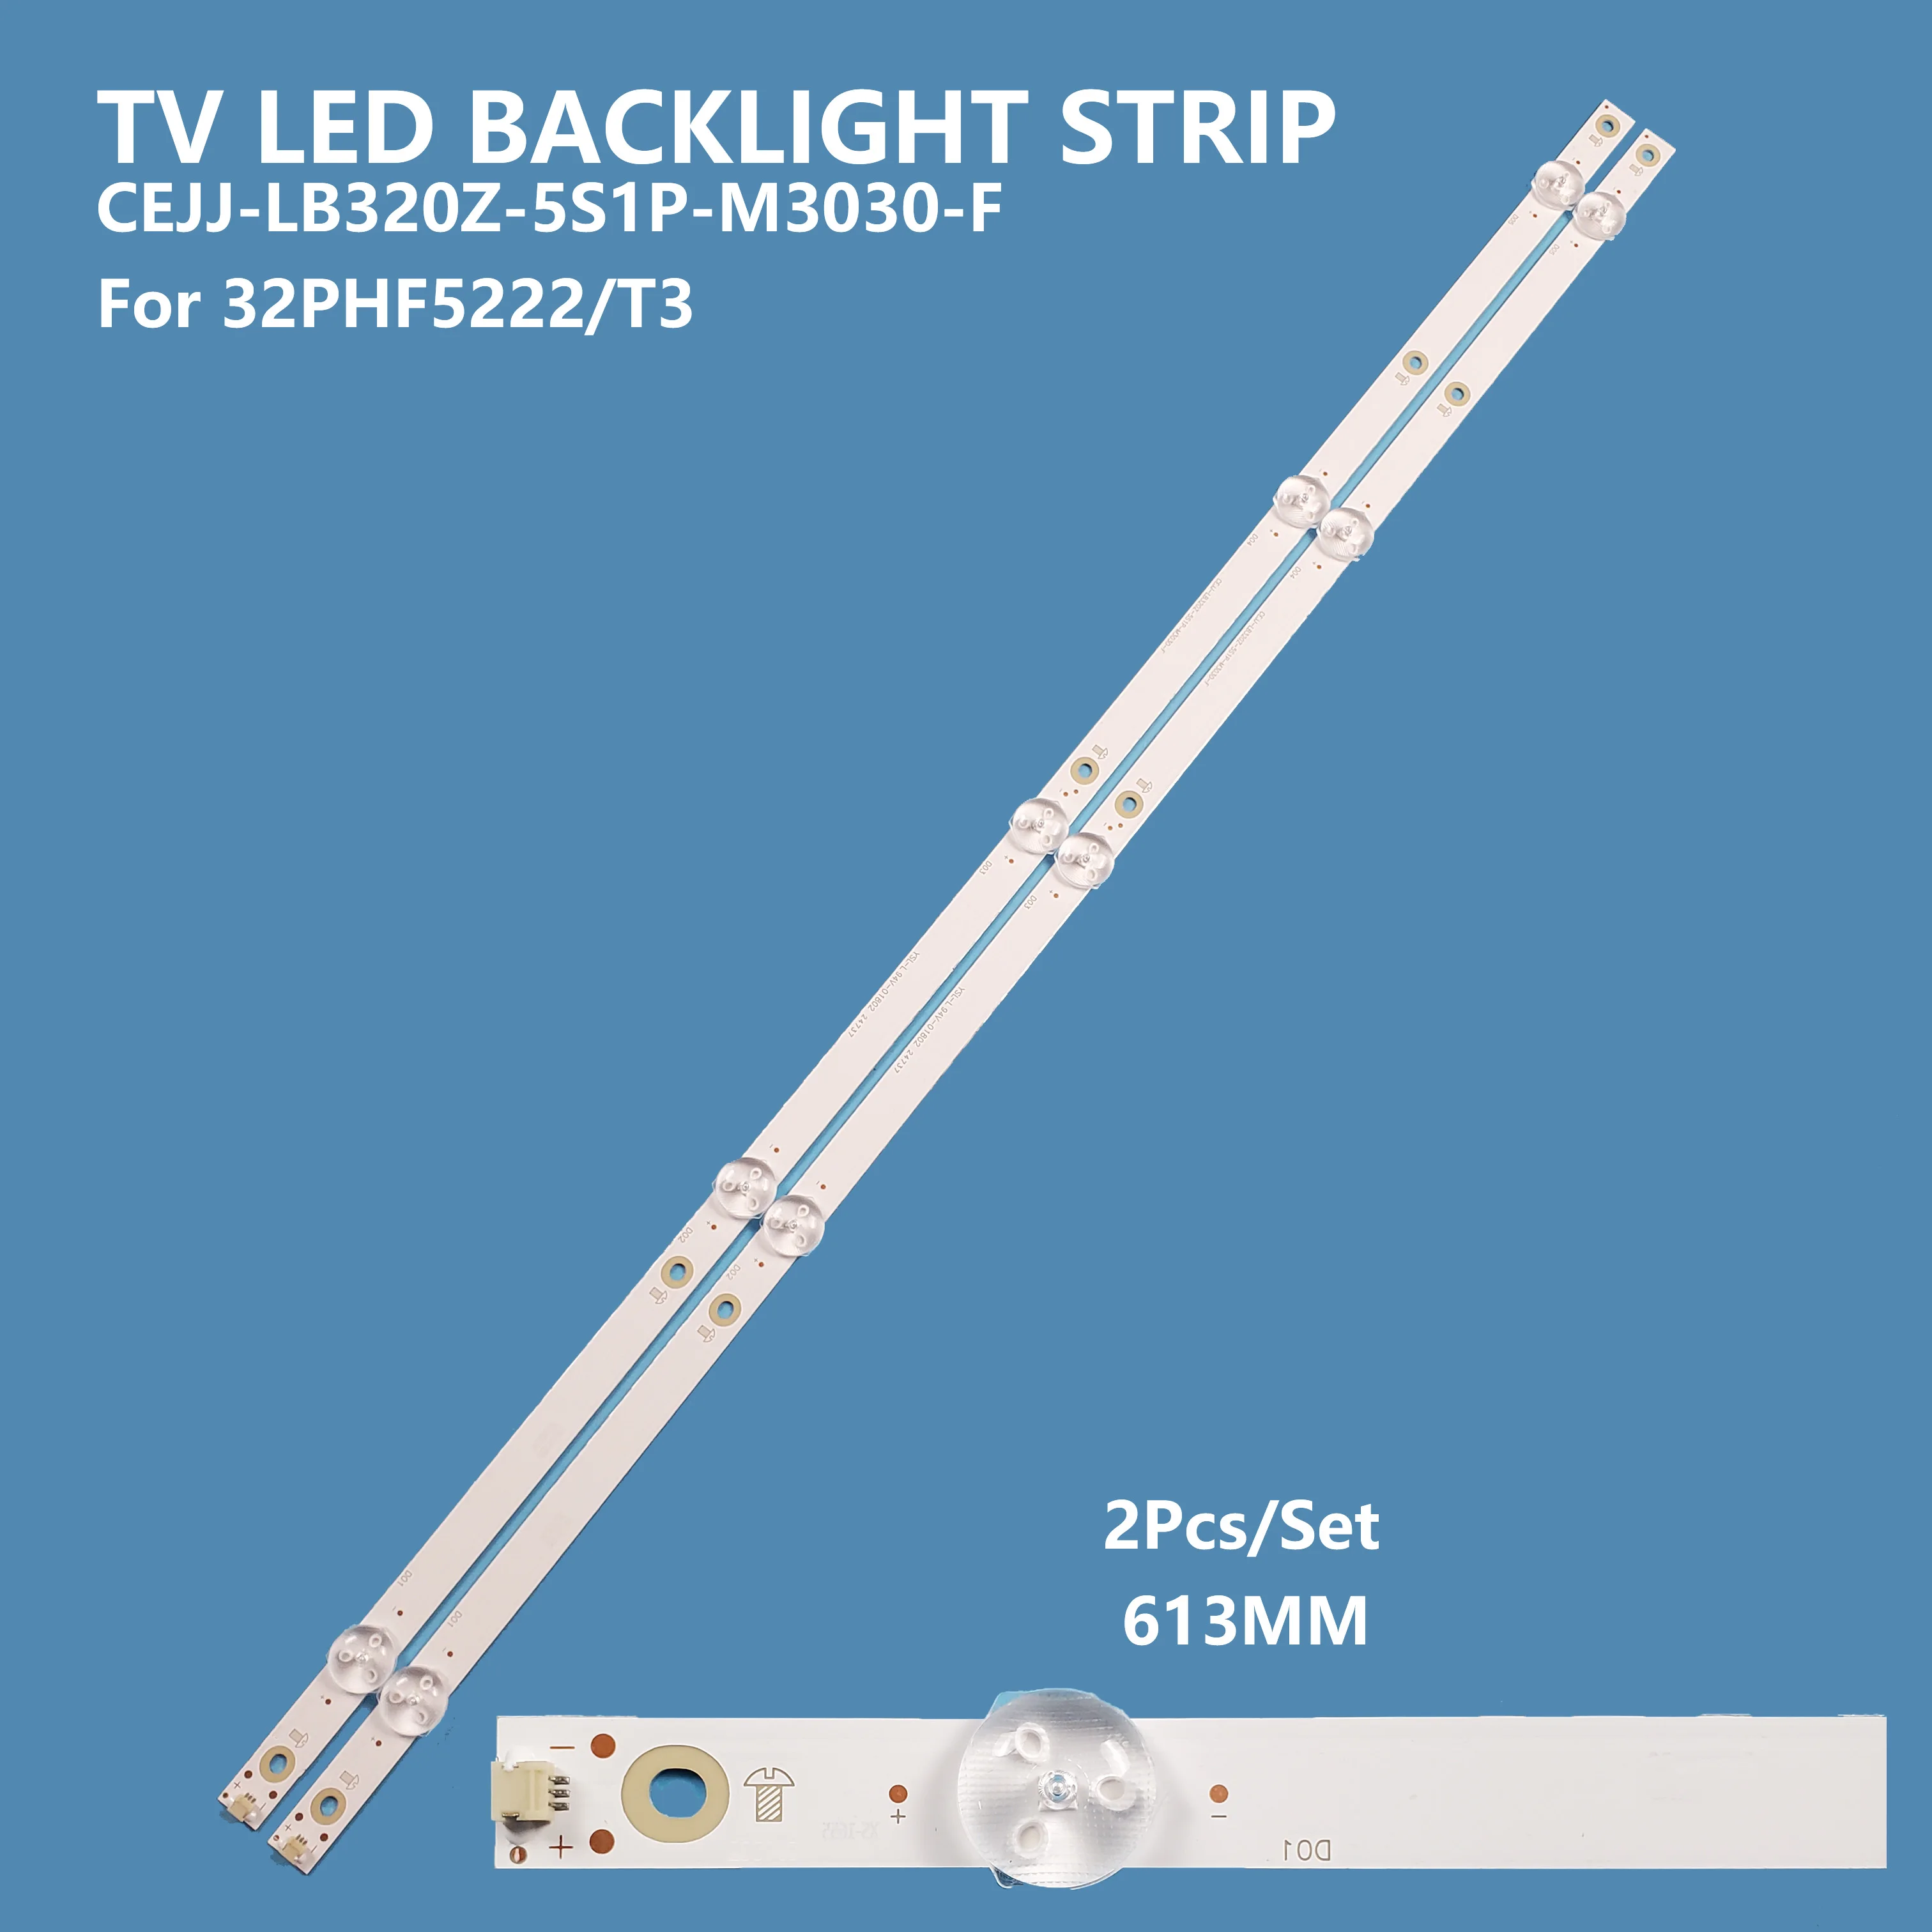 2PCS/set New Arrival TV Led Backlight Strip CEJJ-LB320Z-5S1P-M3030-F For PHILIPS 32inch 32PHF5222/T3 tv Bar Light Accessories 2pcs nano coating hardened extrusion wheel voron bng accessories high precision processing suitable for high end voron models